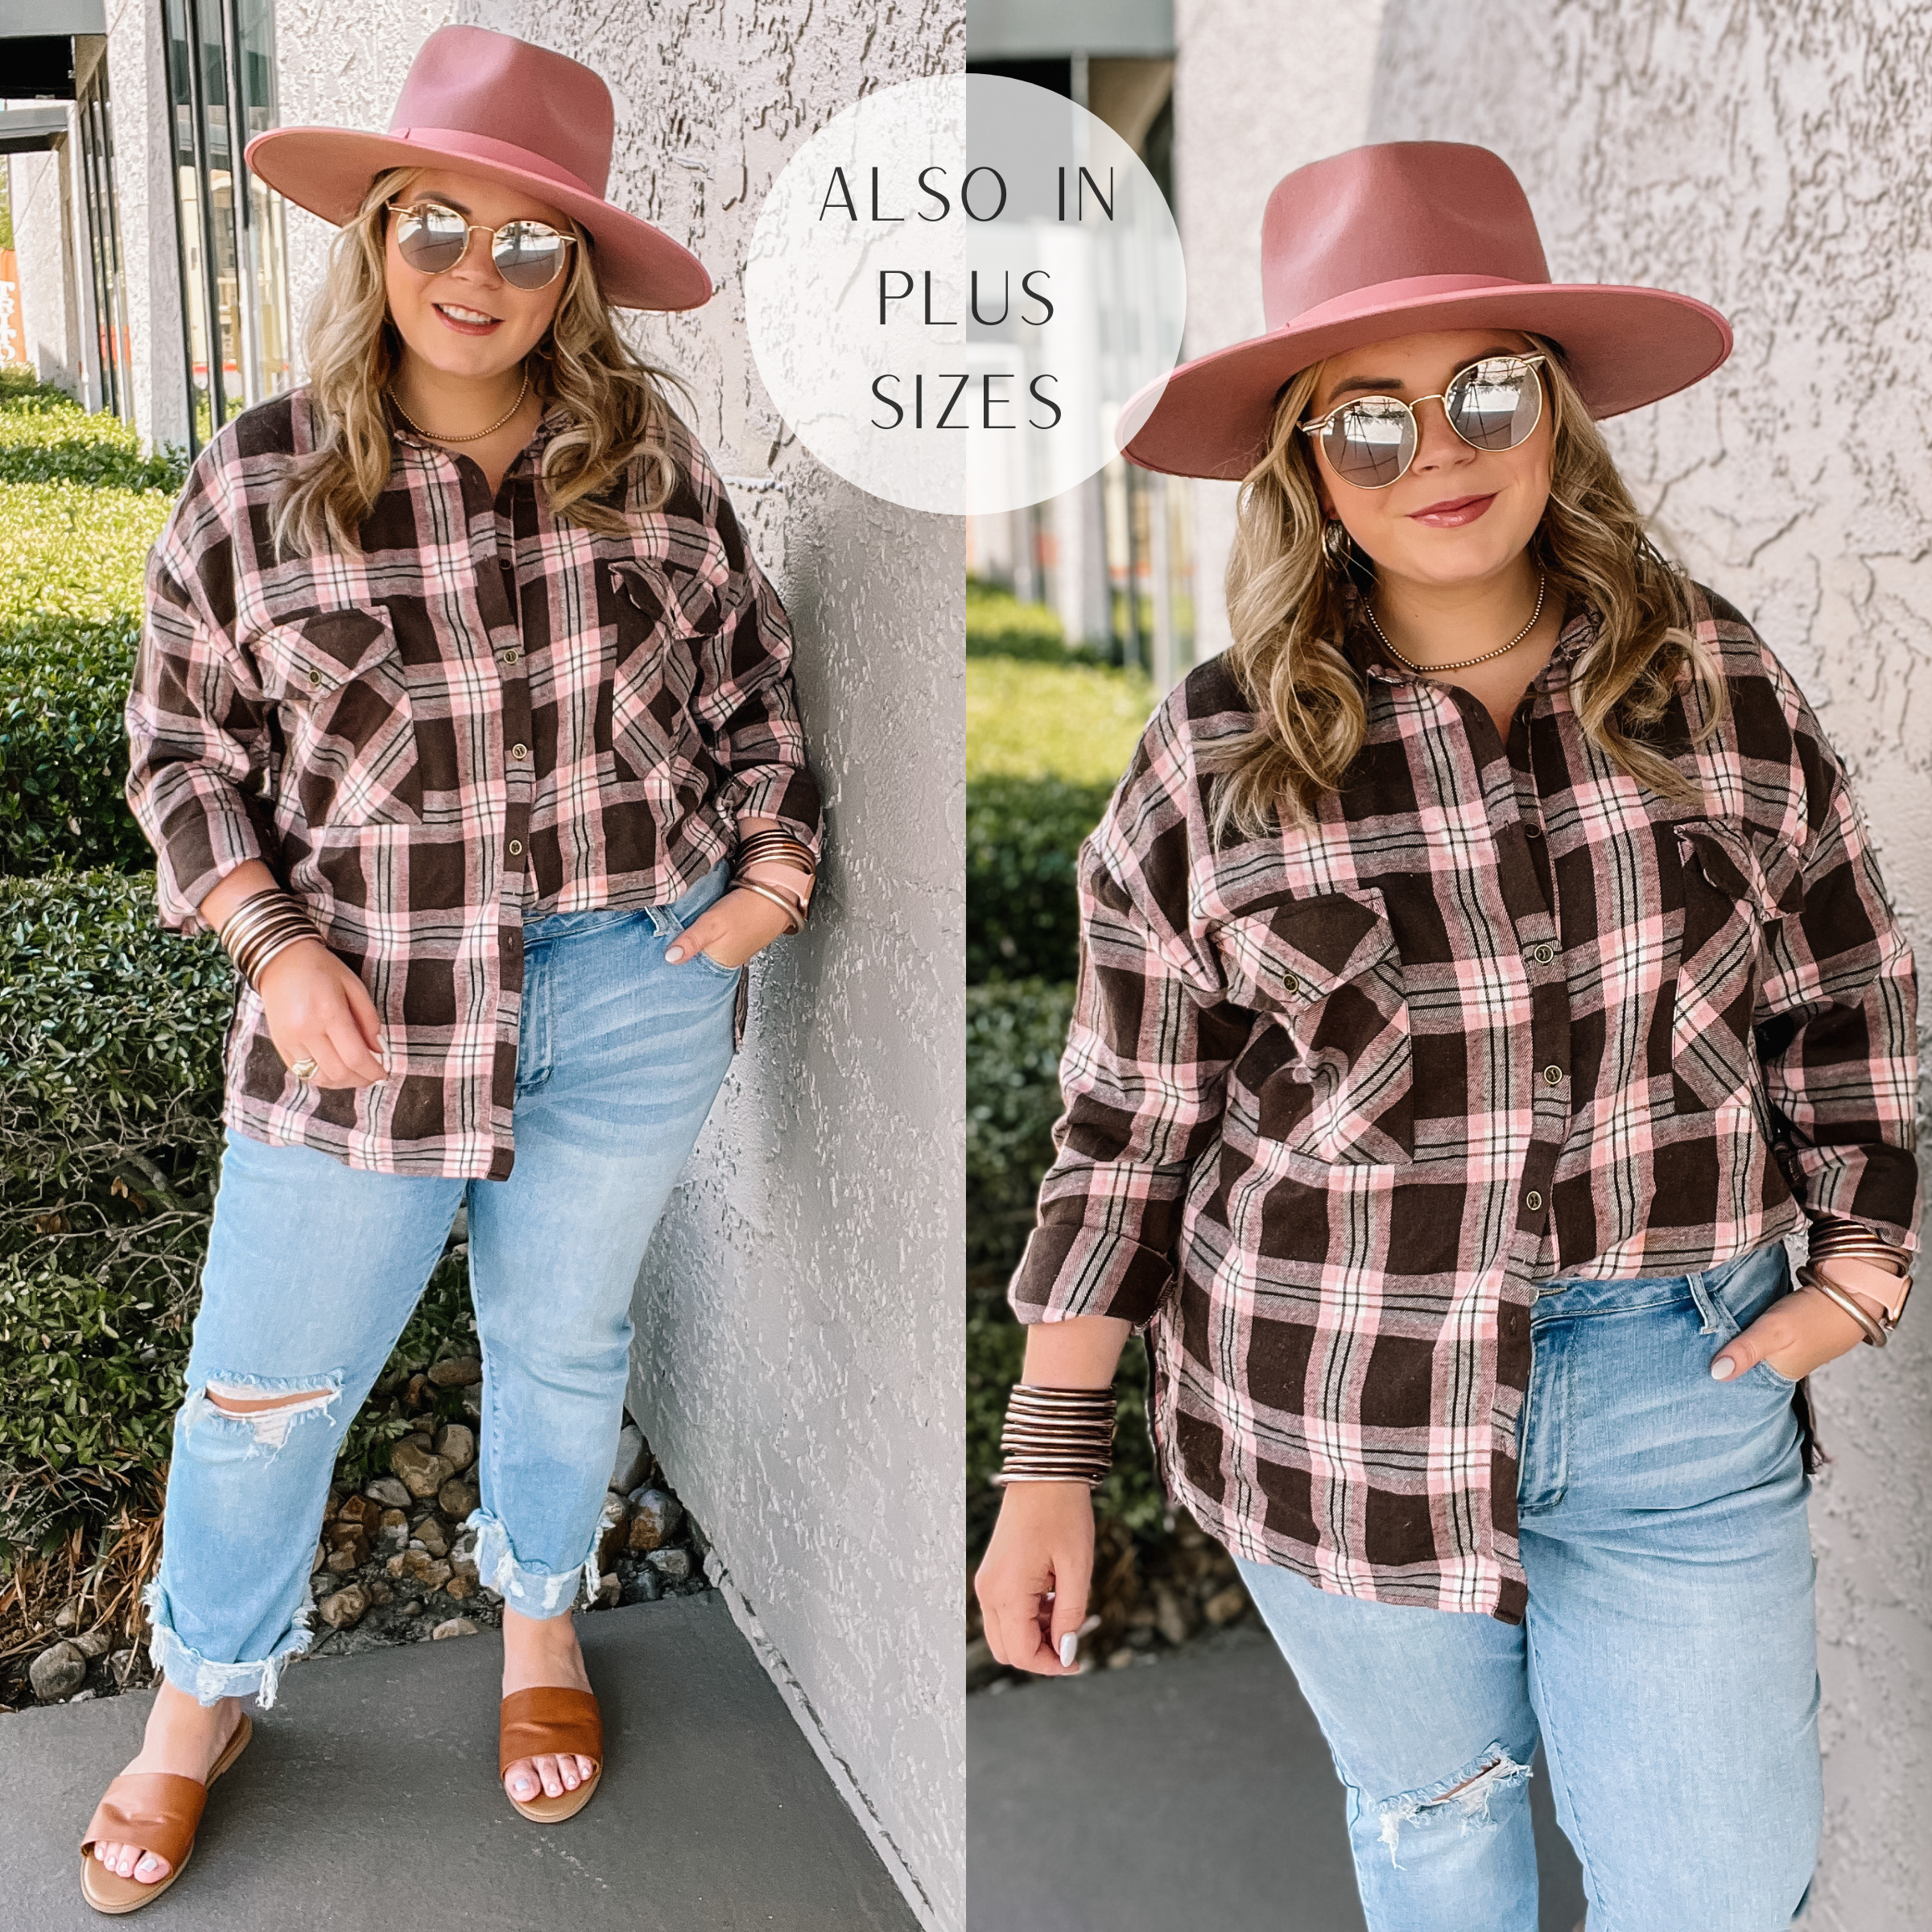 Model is wearing a brown and pink plaid button up top. Model has it paired with distressed jeans, tan sandals, and a pink hat.